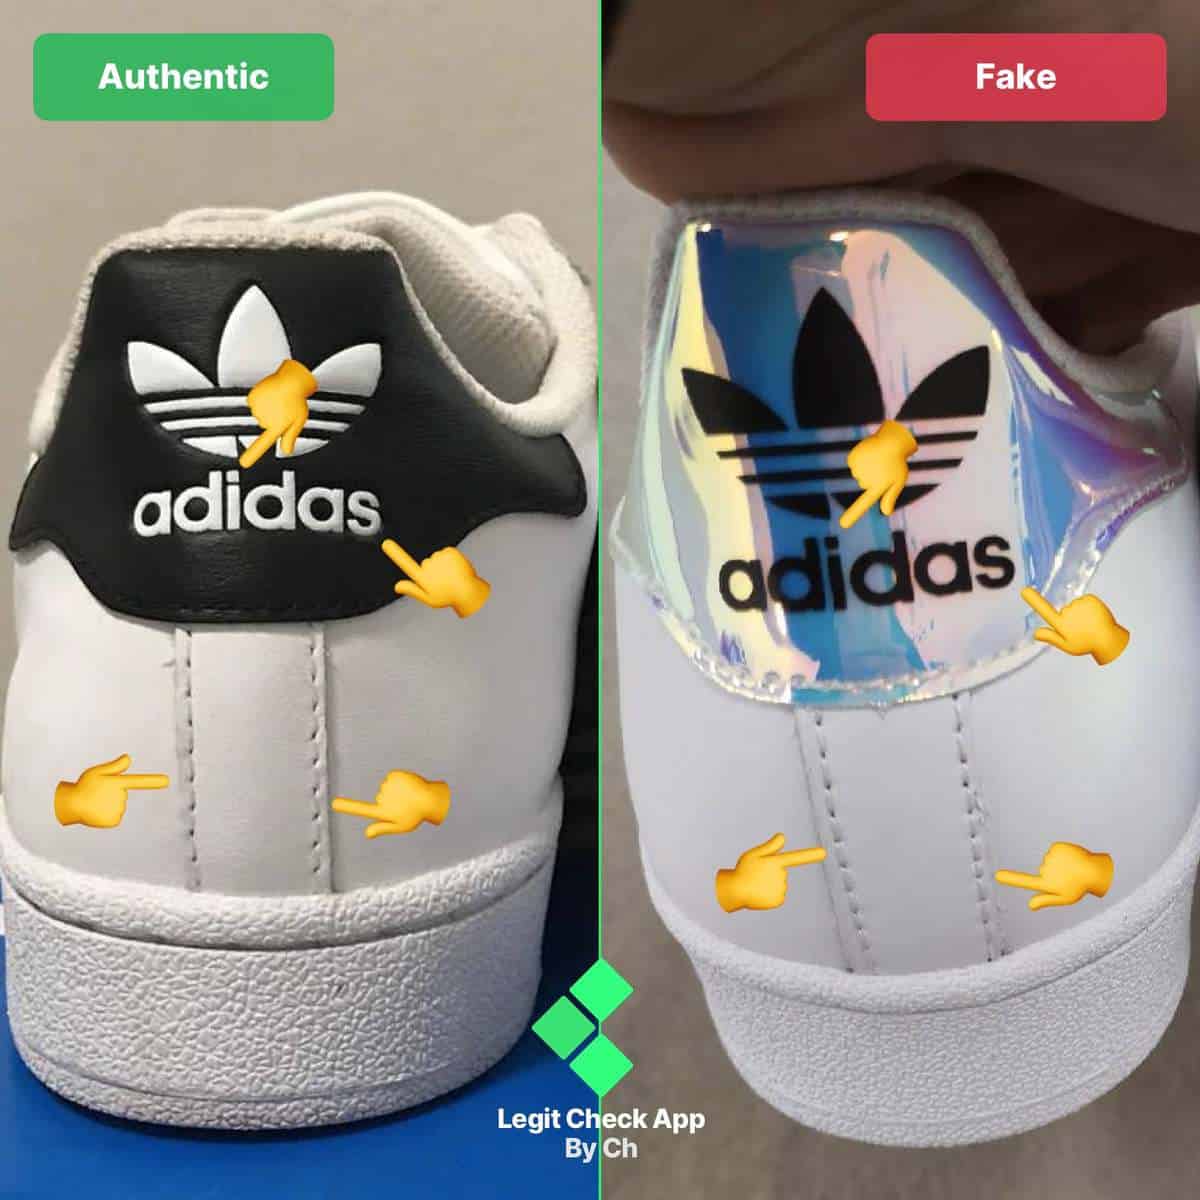 How Spot Fake Superstar Sneakers Fake Guide)